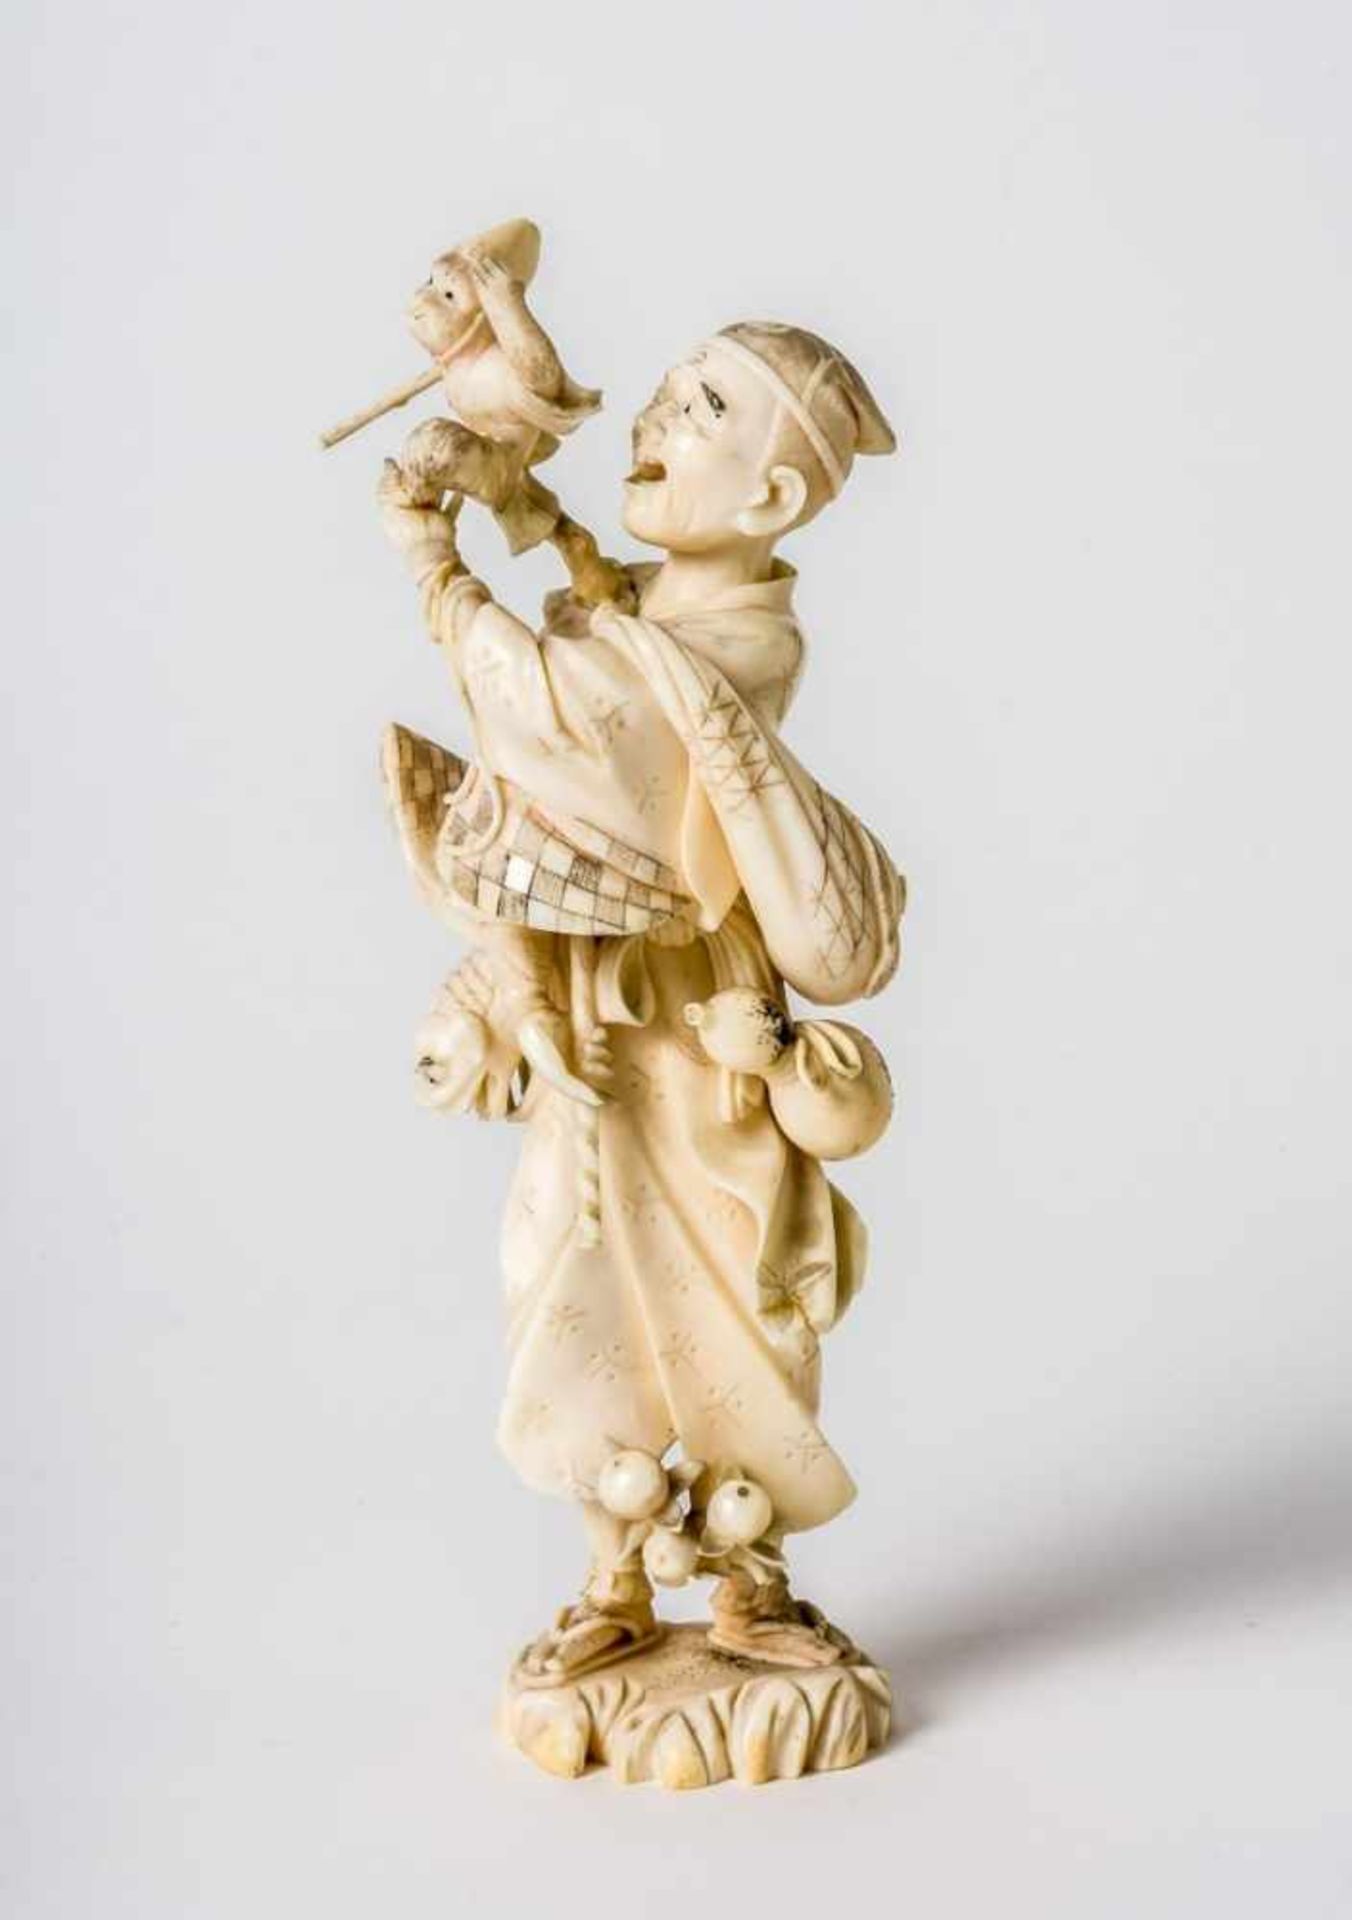 Okimono of a juggler with monkey, Japan, ivory carving, unsigned, probably 19th c.,Height: ca. 17 cm